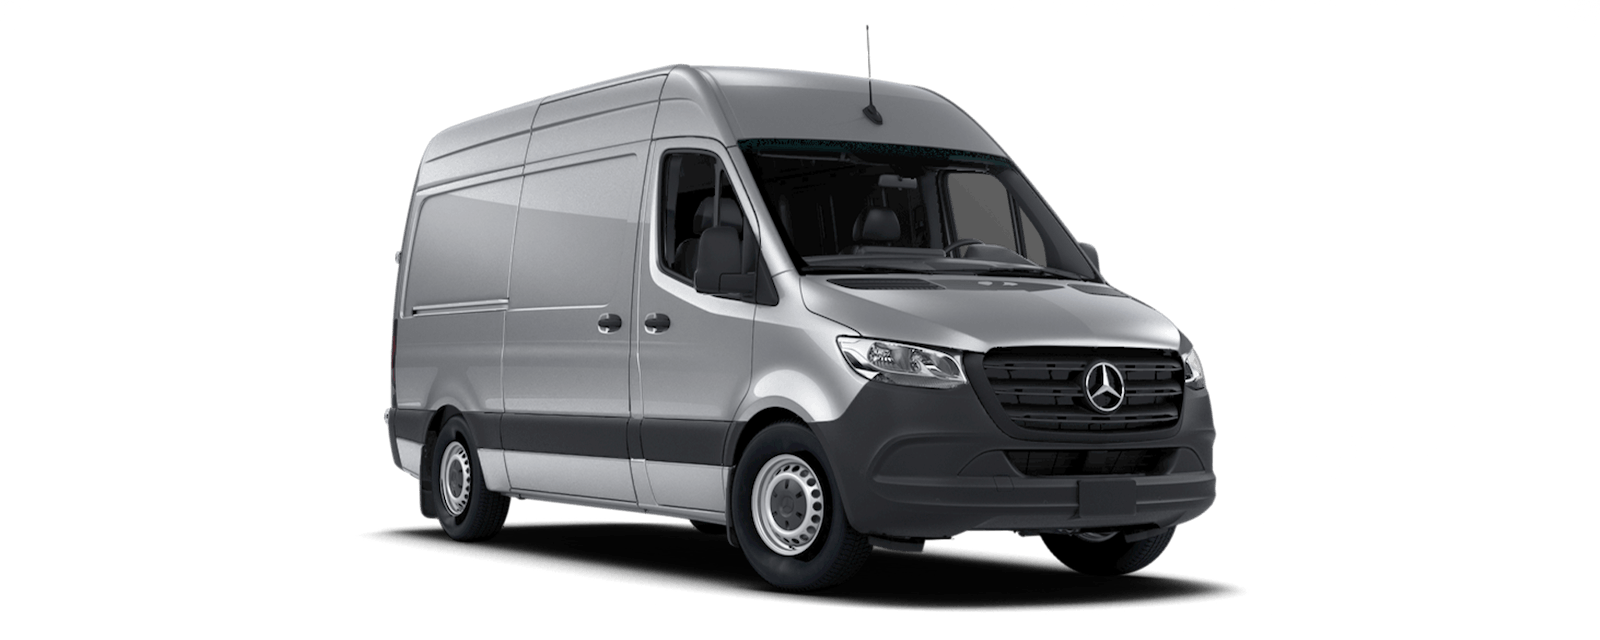 2022 Thor Sanctuary Tranquility Mercedes Sprinter Van 2500 Chassis Silver Exterior key feature